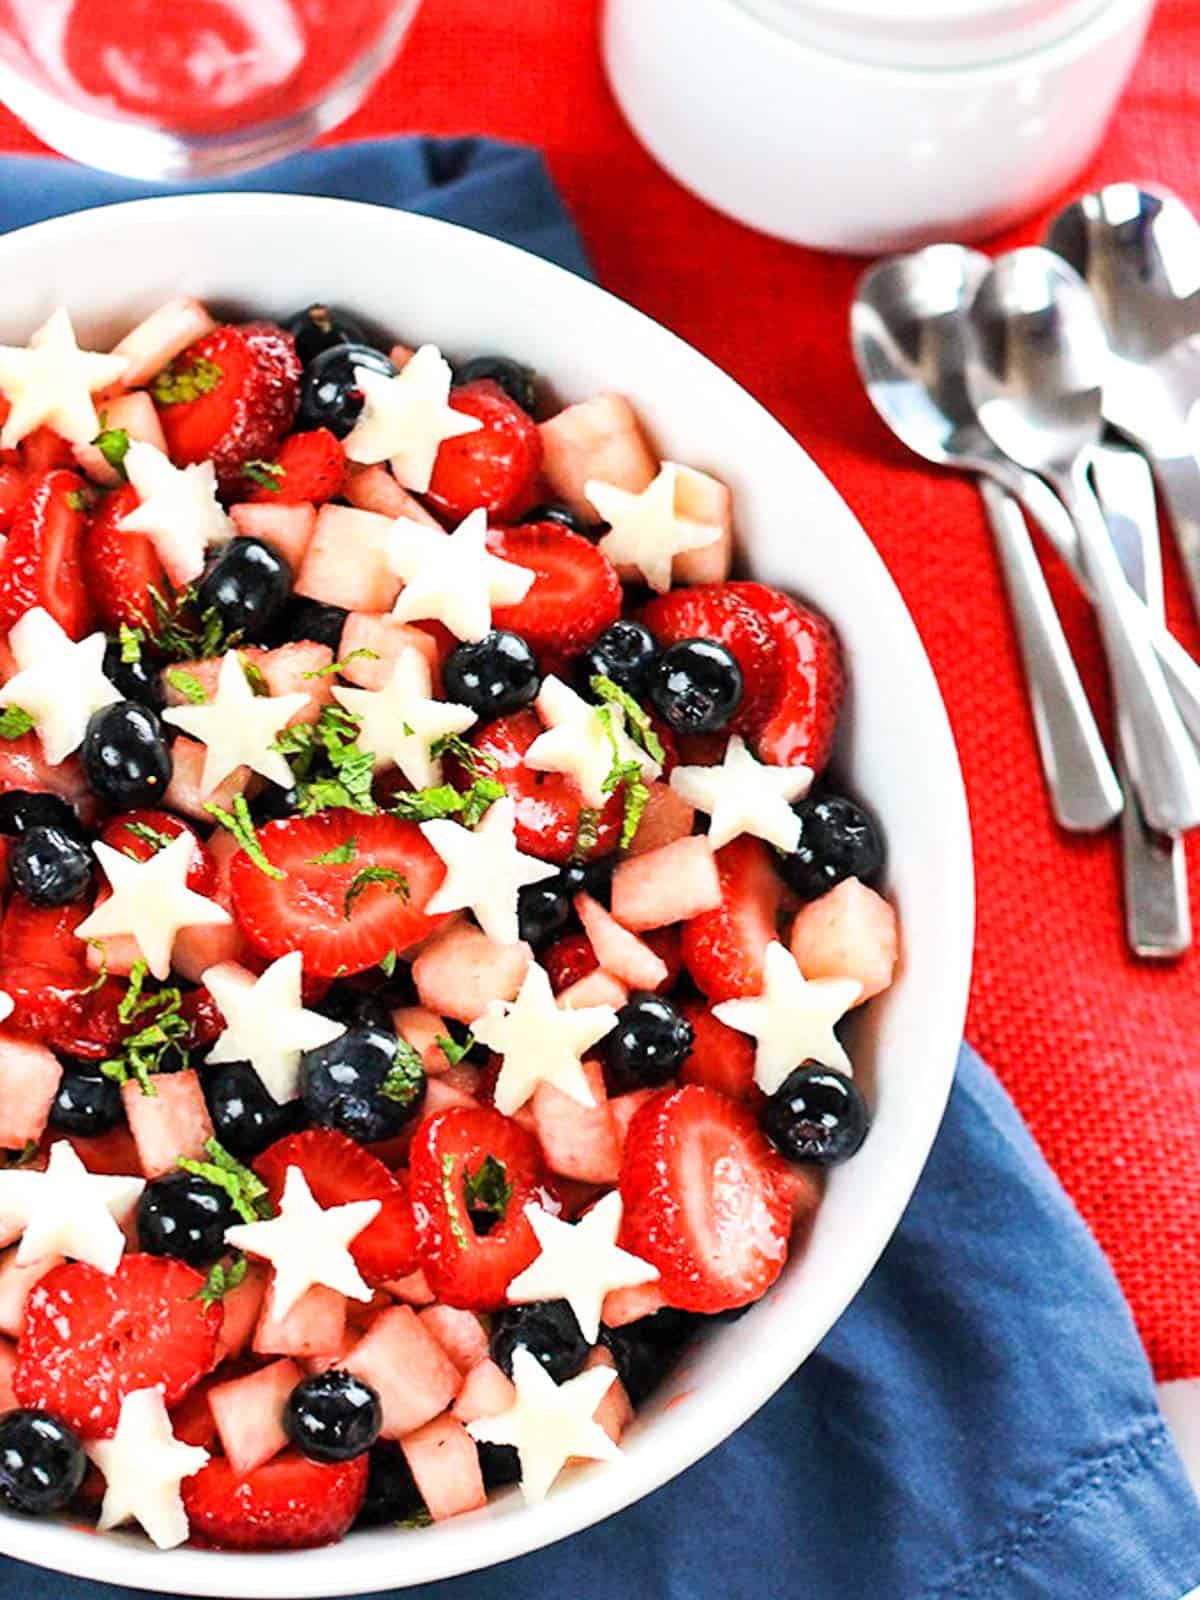 A white bowl filled with salad made with strawberries, blueberries and jicama stars.